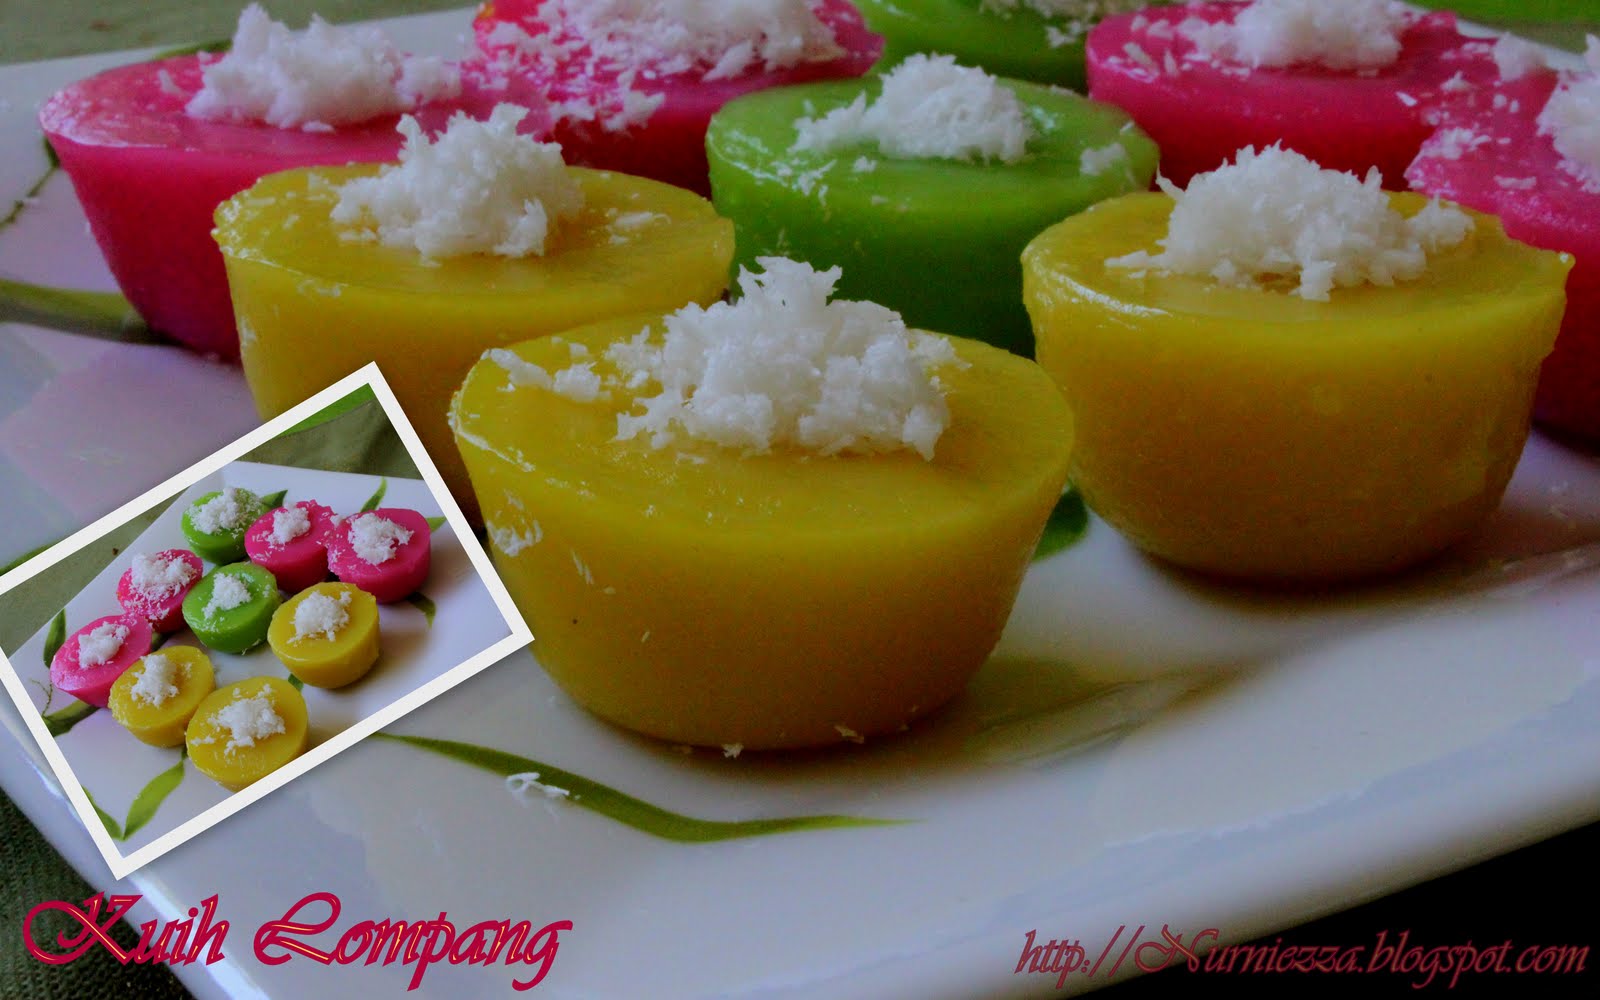 Our Journey Begins: Kuih Lompang